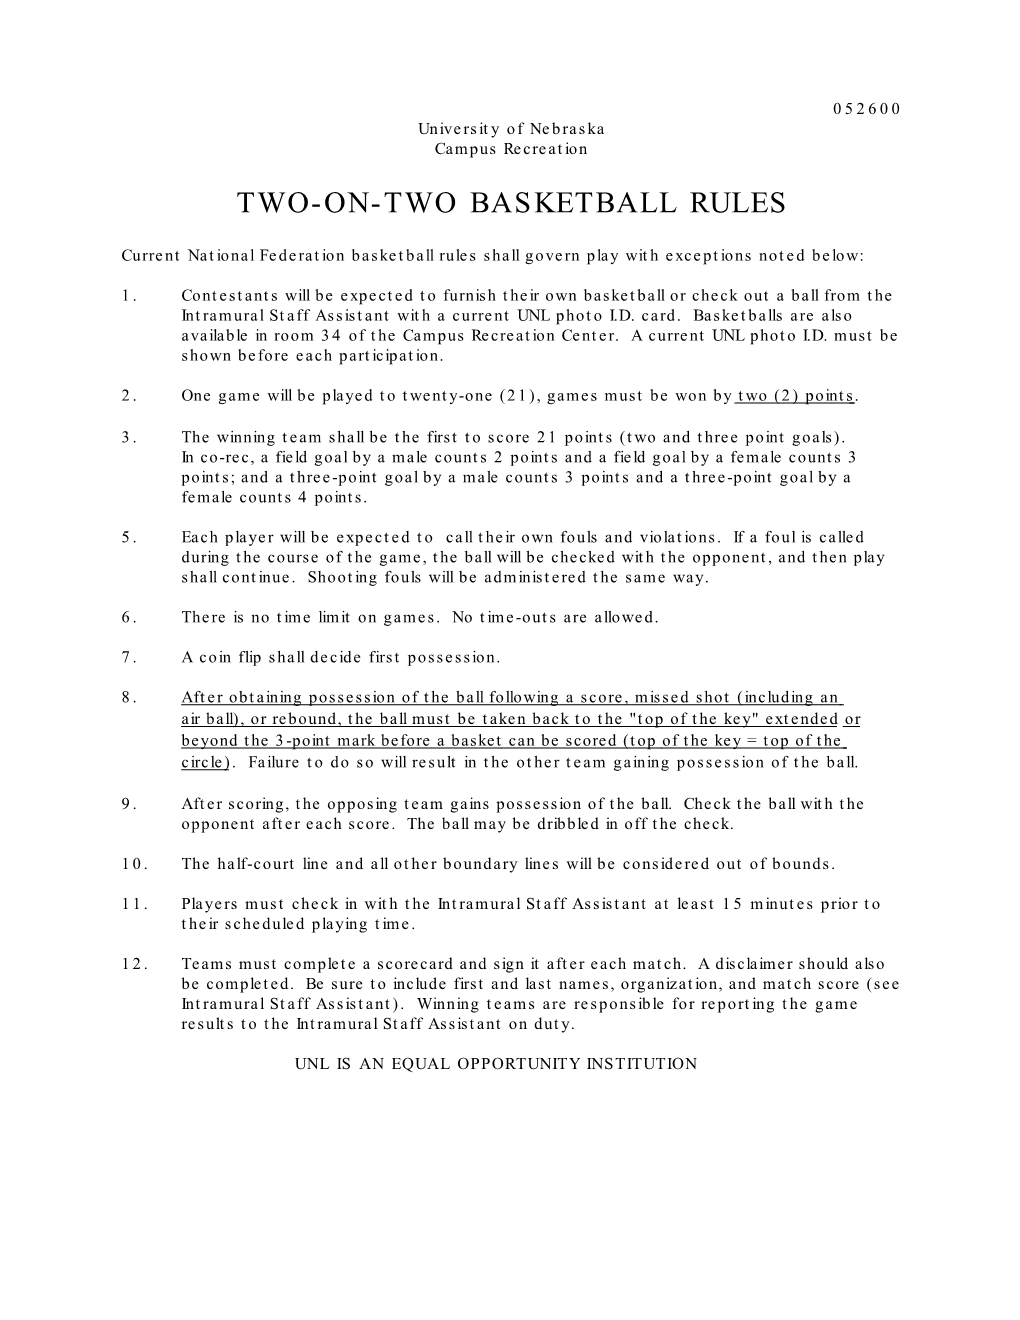 Two-On-Two Basketball Rules